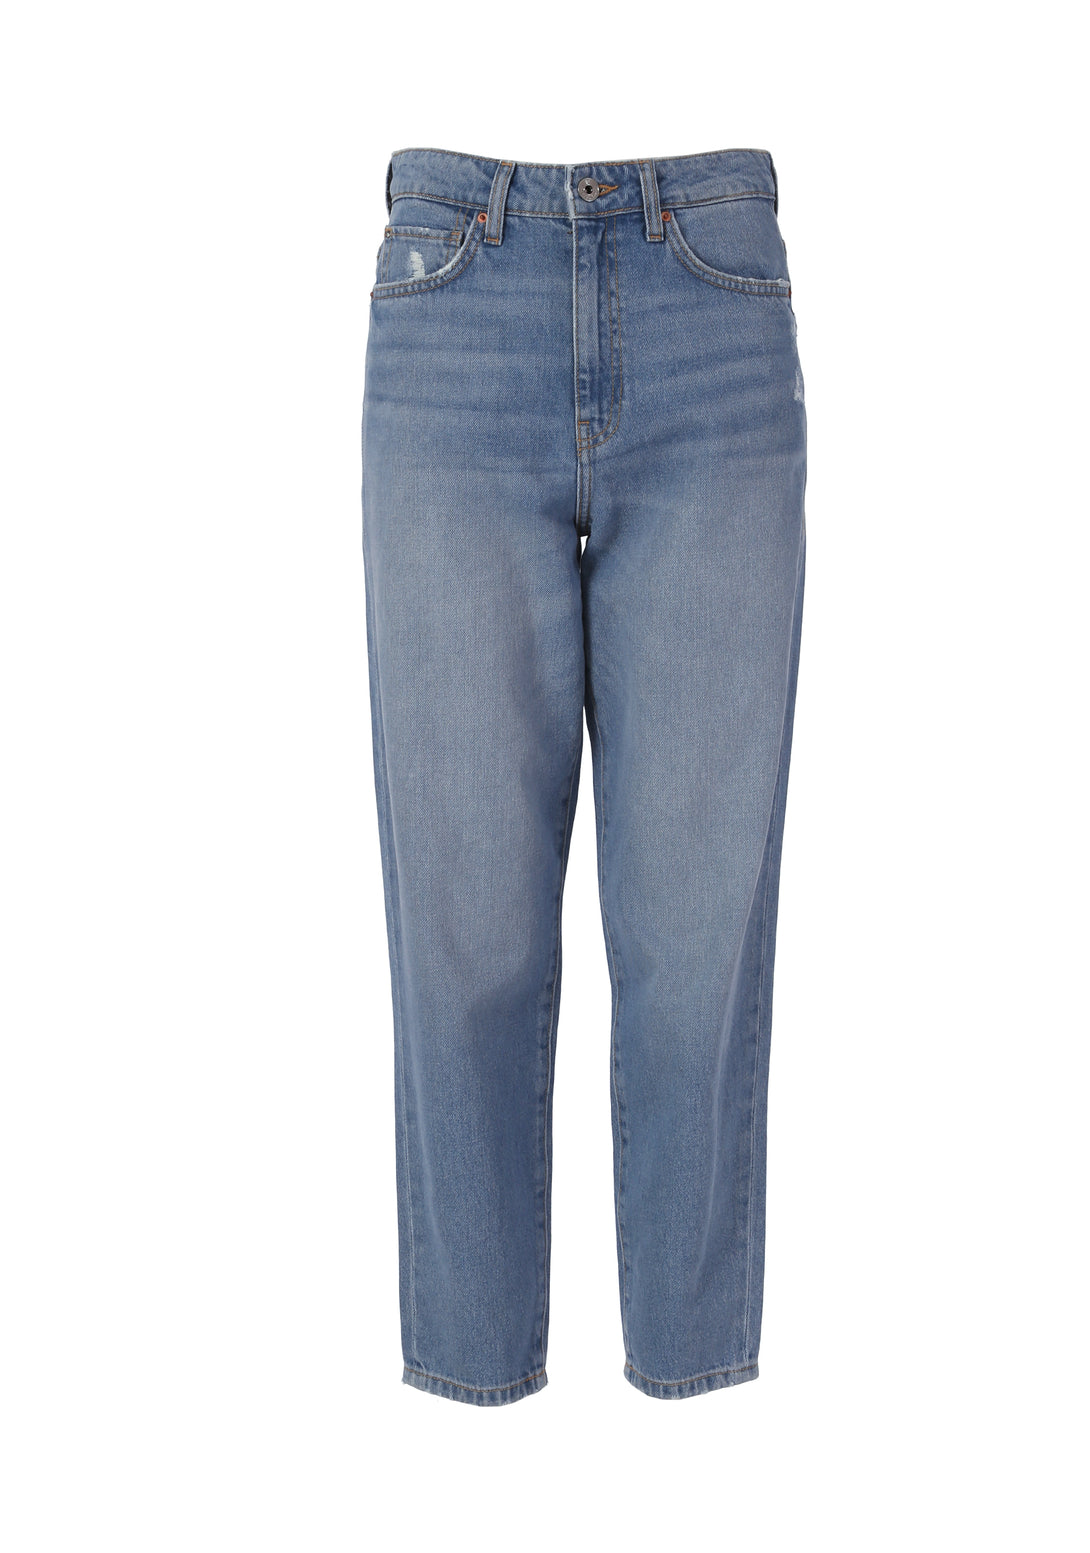 Jeans mom fit cropped made in denim with bleached light wash Fracomina FP24SVD005D41903-062-1